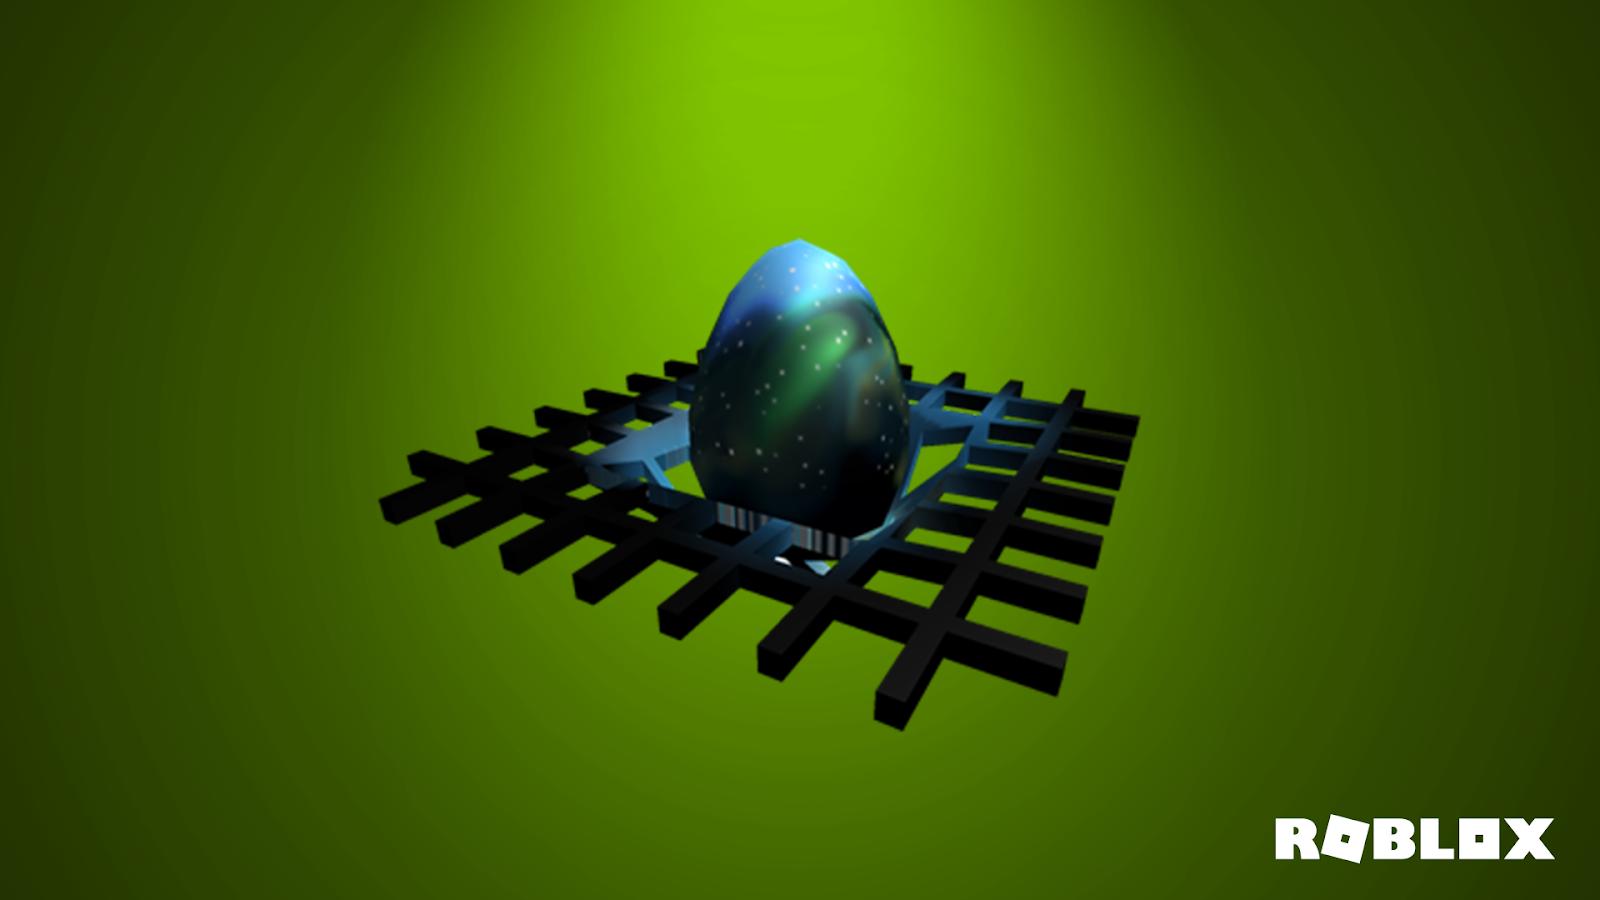 Roblox On Twitter This Internationalspaceday Explore A Place Beyond Earth S Rules In Gravity Shift You May Just Find The Elusive Egg Of Gravitation In These Winding Passages Https T Co 9le95iiscc Egghunt2019 Https T Co L7fcsij6lp - roblox on twitter this internationalspaceday explore a